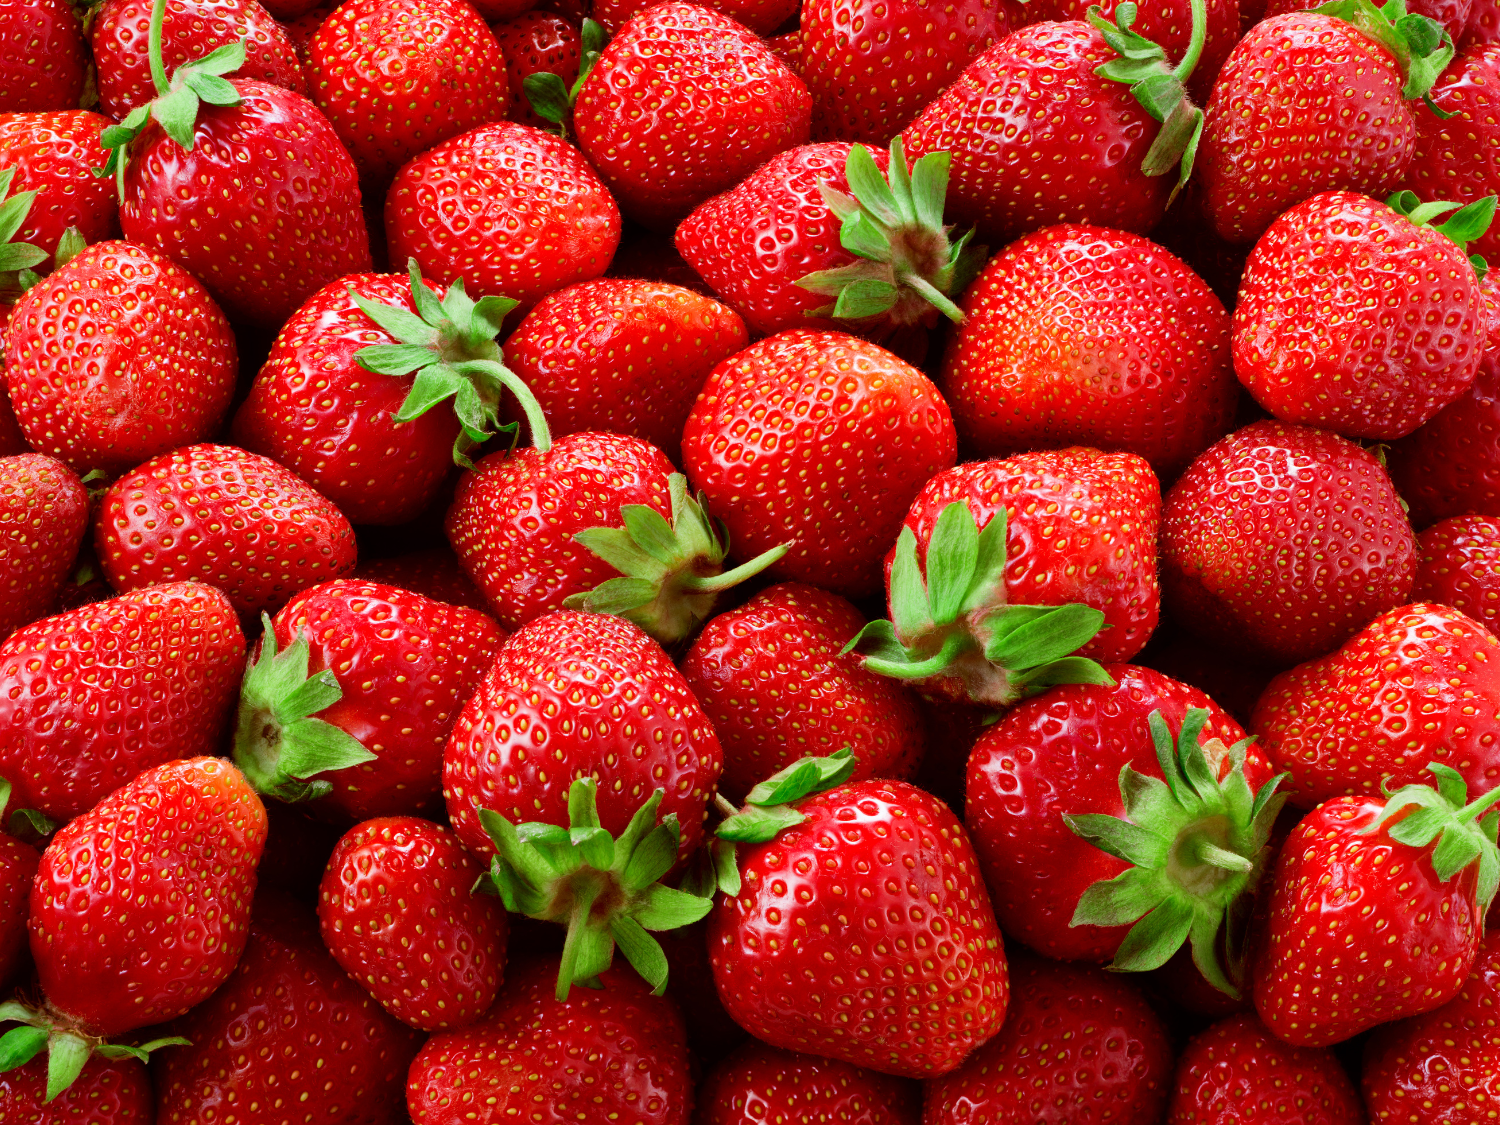 Whitaker farm, whitaker farms, strawberries, strawberry picking, you pick strawberries, u-pick strawberries, fresh strawberries, nursery, farm and nursery, local nursery, local farm, working farm, local plants, buy flowers locally, local flowers, flowers for sale, Bakery, online bakery, bakery order online, local bakery, fresh baked, homemade, cookies, cakes, pies, scones, muffins, treats, sweets, local bake shop, bake shop, café, local café, Asheboro, Greensboro, triad, bakery pretzels, warm pretzels, hot pretzels, pretzels with mustard, pretzels with marinara, pretzels with beer cheese, Produce, farm fresh, farm produce, farmers market, farm market, fresh vegetables, fresh fruits, recipes, seasonal recipes, summer recipes, winter recipes, fall recipes, farm recipes, healthy recipes